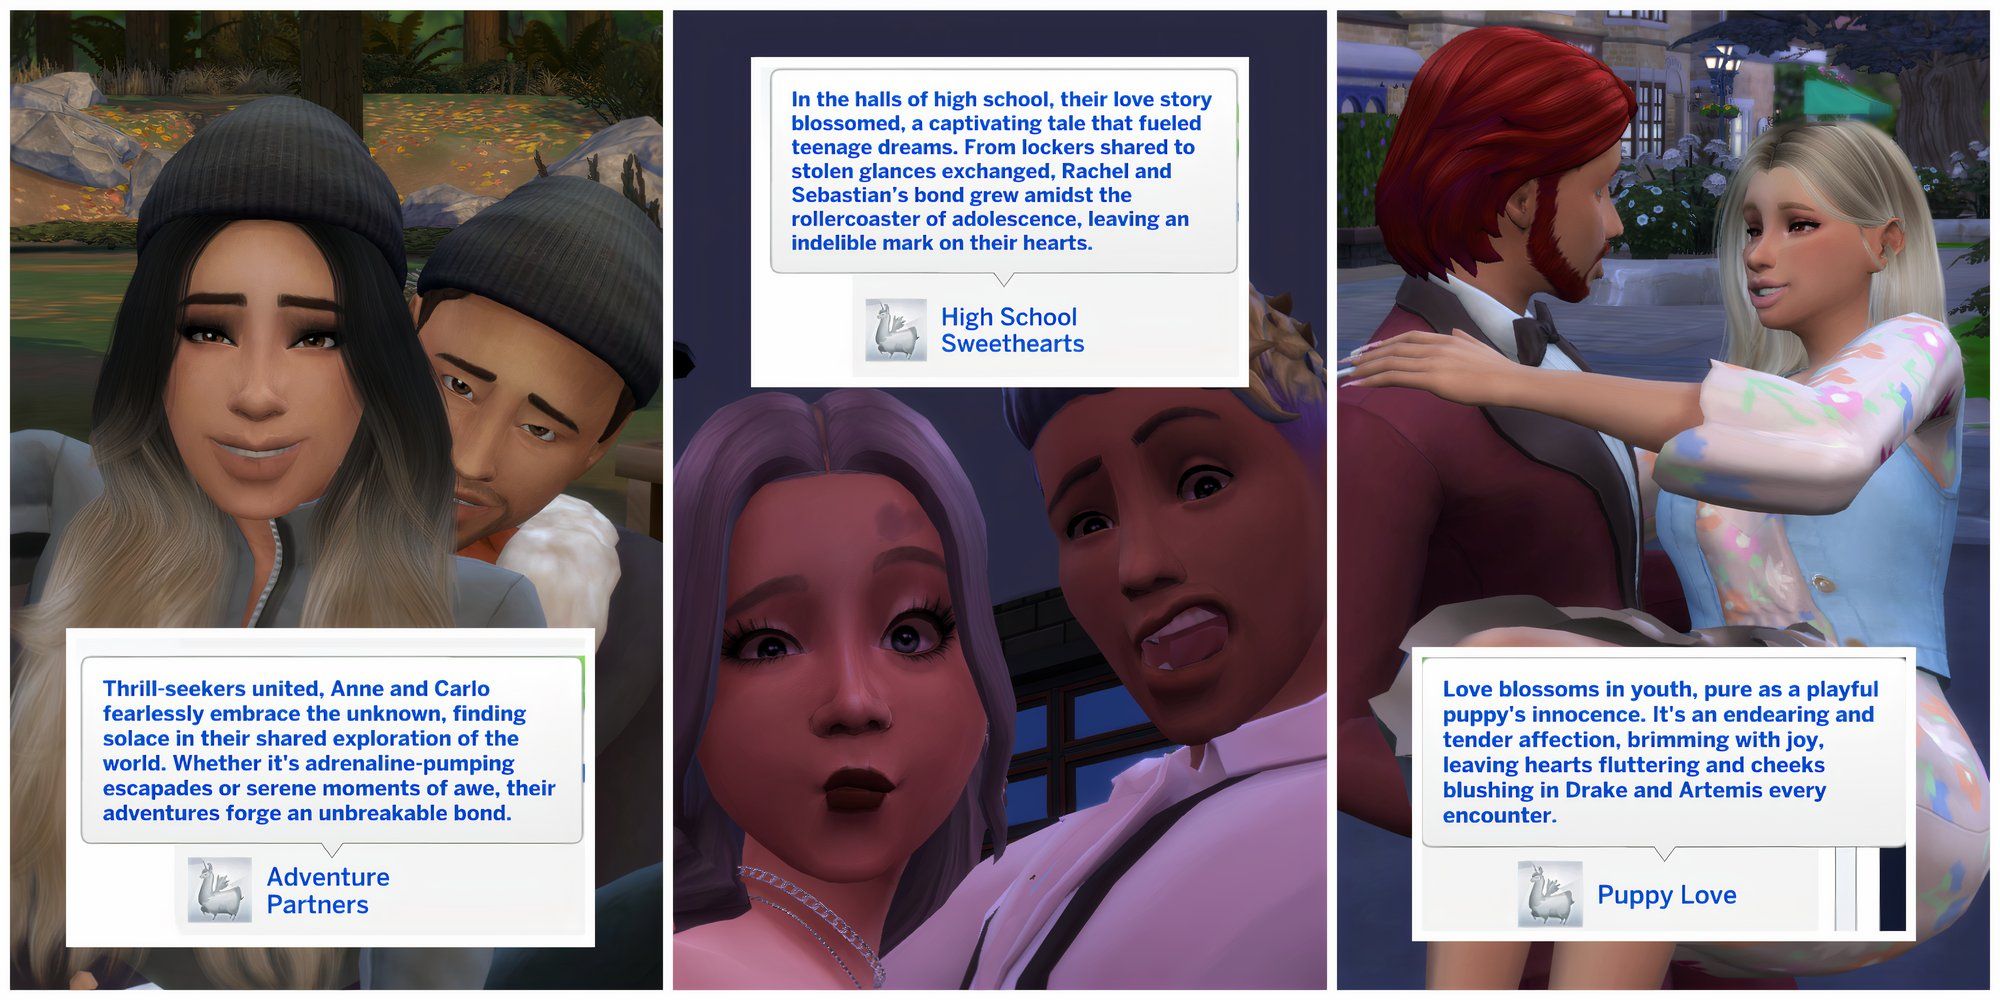 Some of the new romantic relationship types from the Enhanced Storytelling Relationship Bits